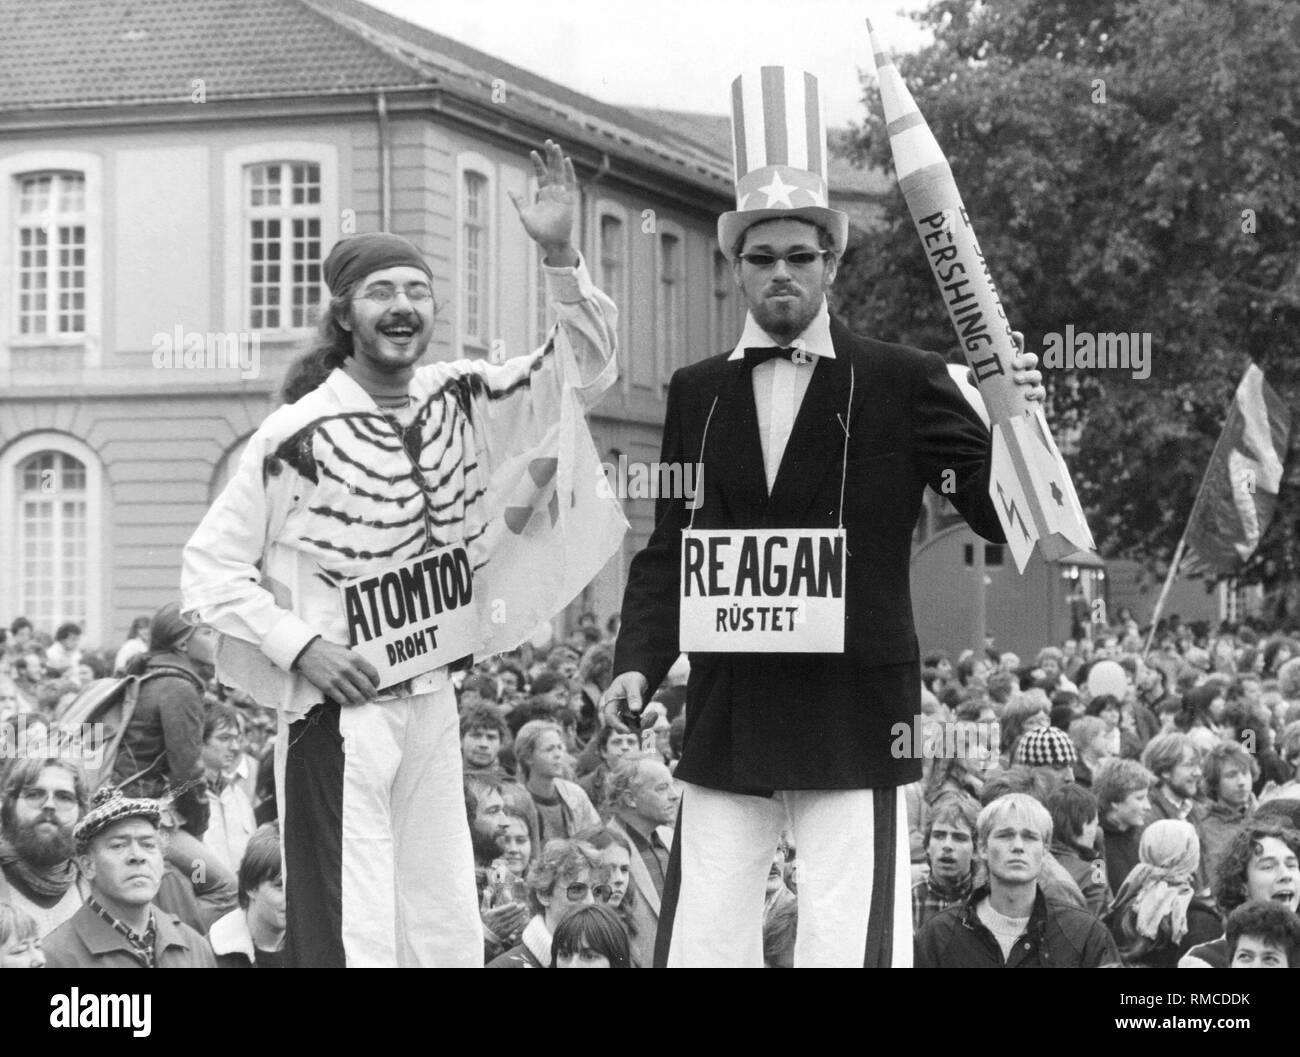 At a demonstration in Bonn against the nuclear armament of NATO,  a demonstrator with a Pershing II rocket and 'Uncle Sam' top hat appears with the slogan: 'Threatening nuclear death - Reagan is arming'. Stock Photo